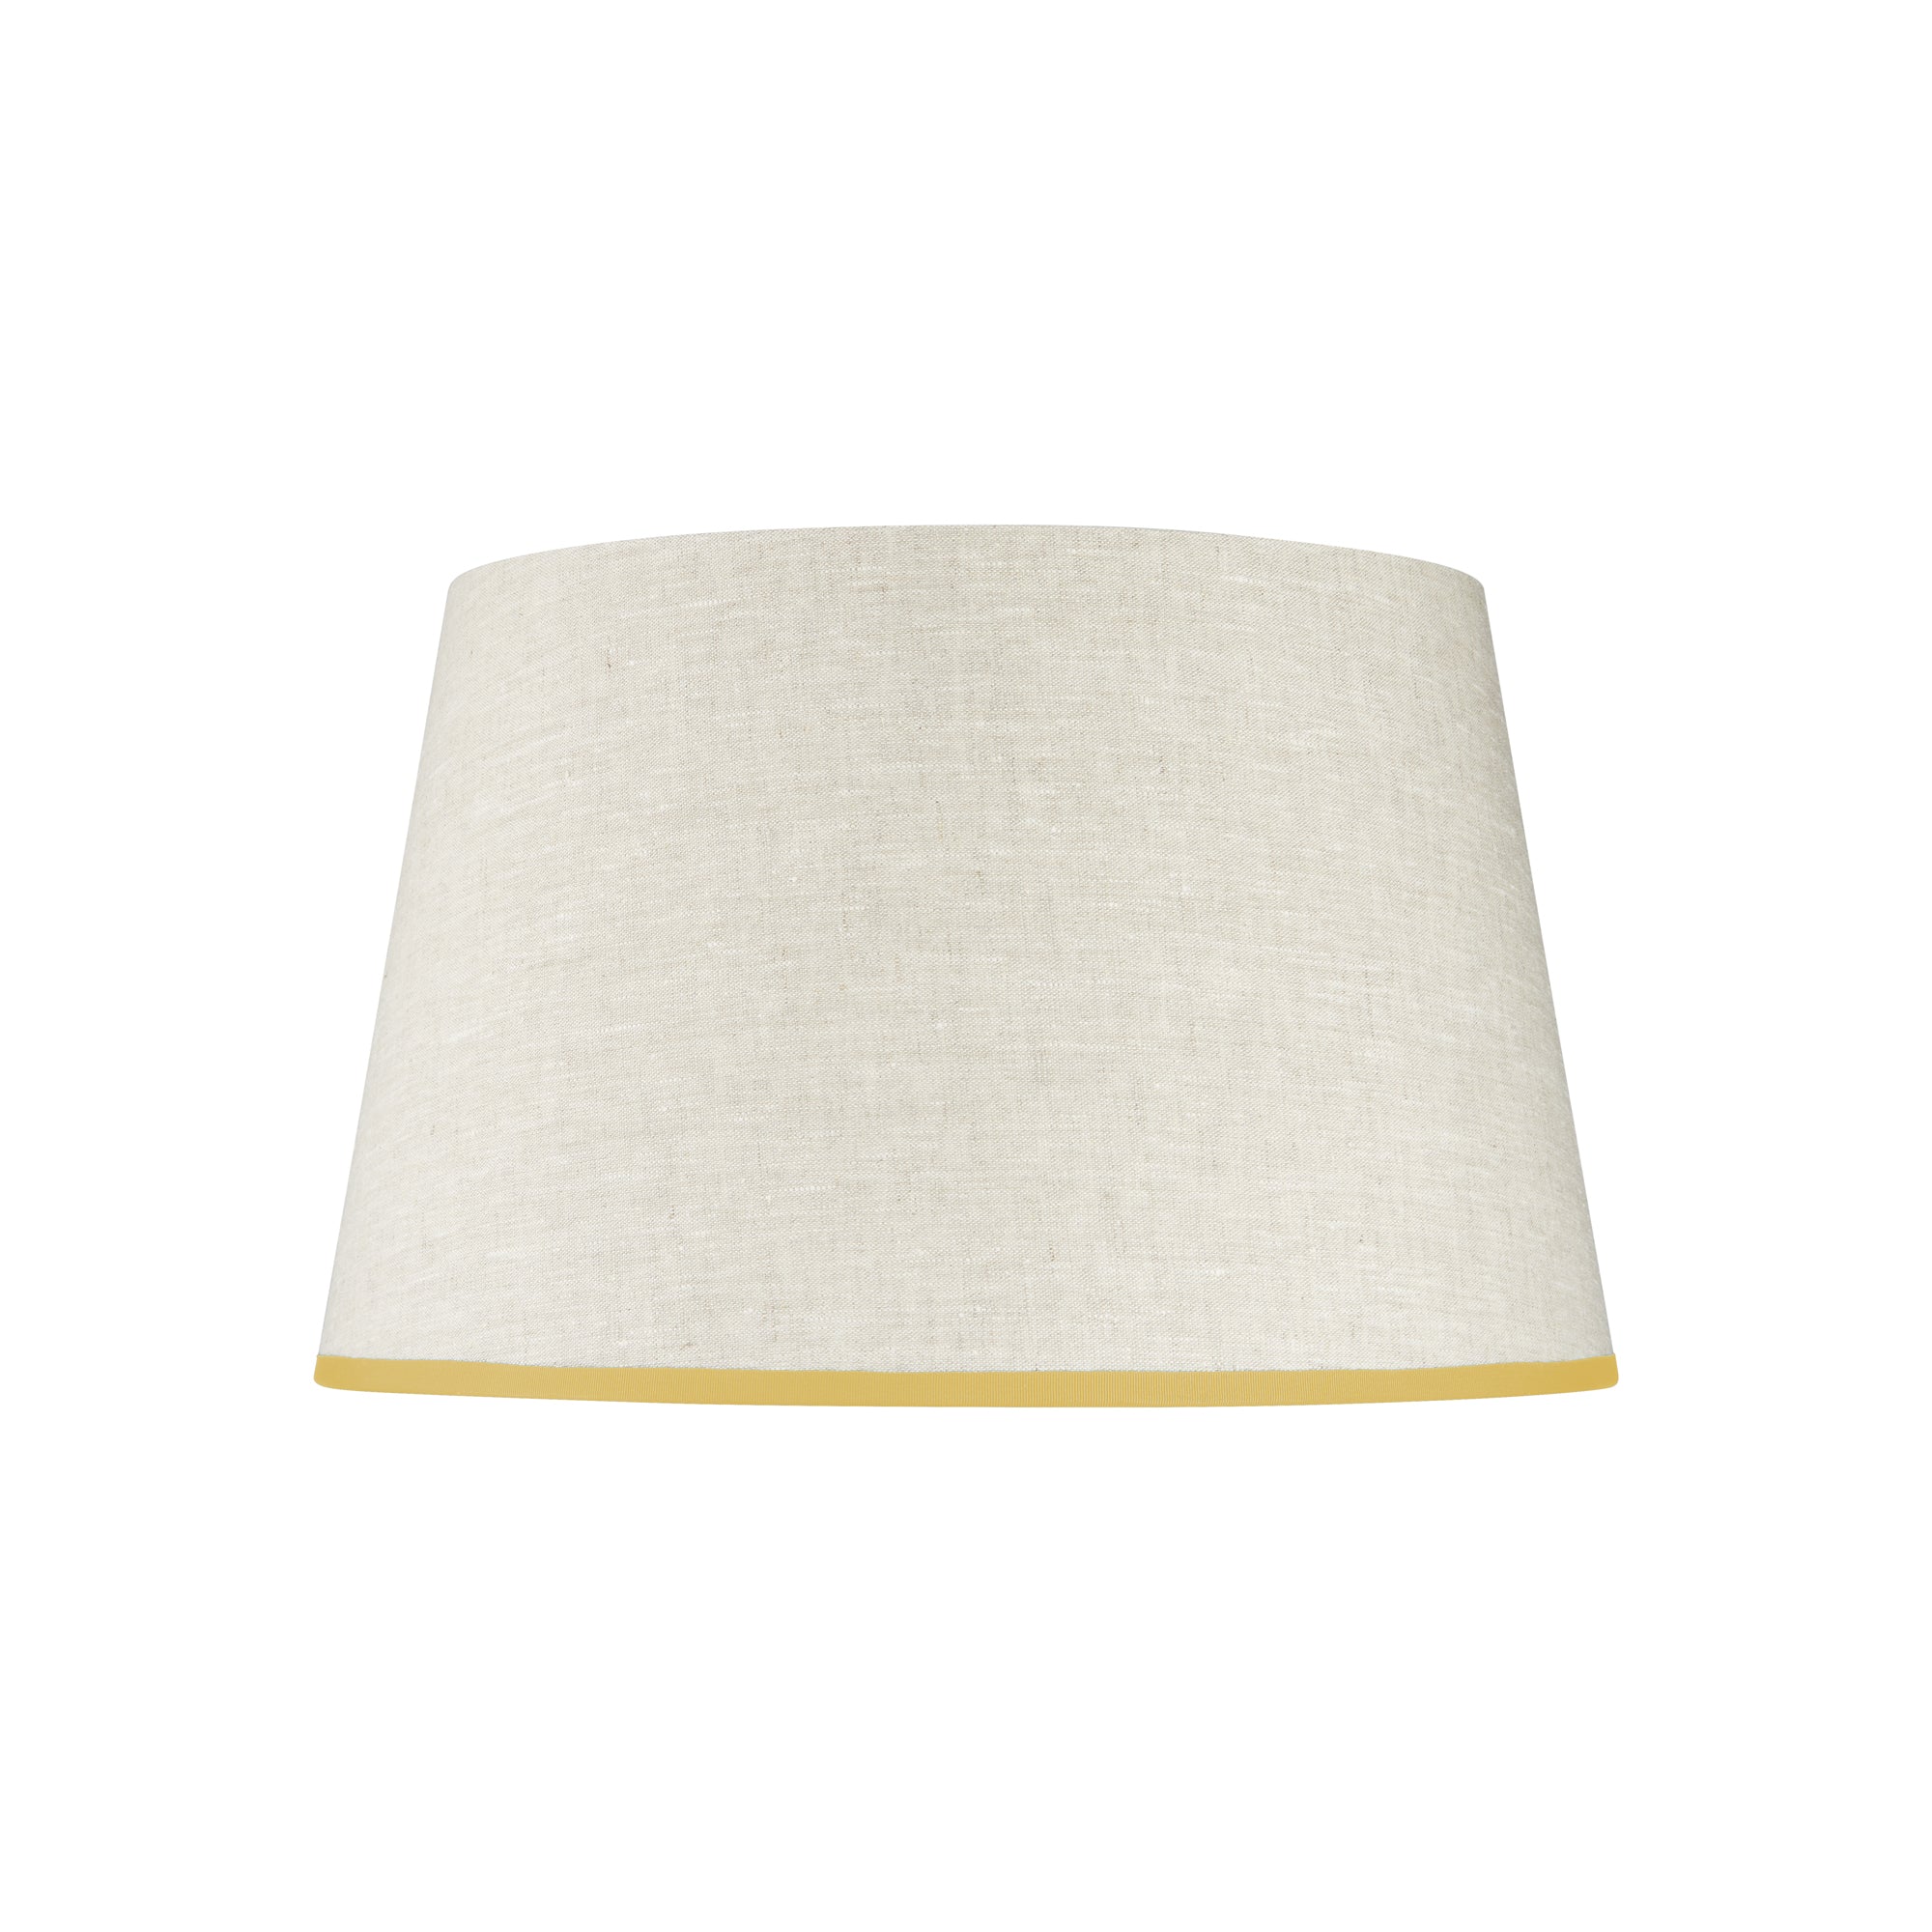 STRETCHED CREAM LINEN LAMPSHADE WITH SUNNY SIDE UP TRIM